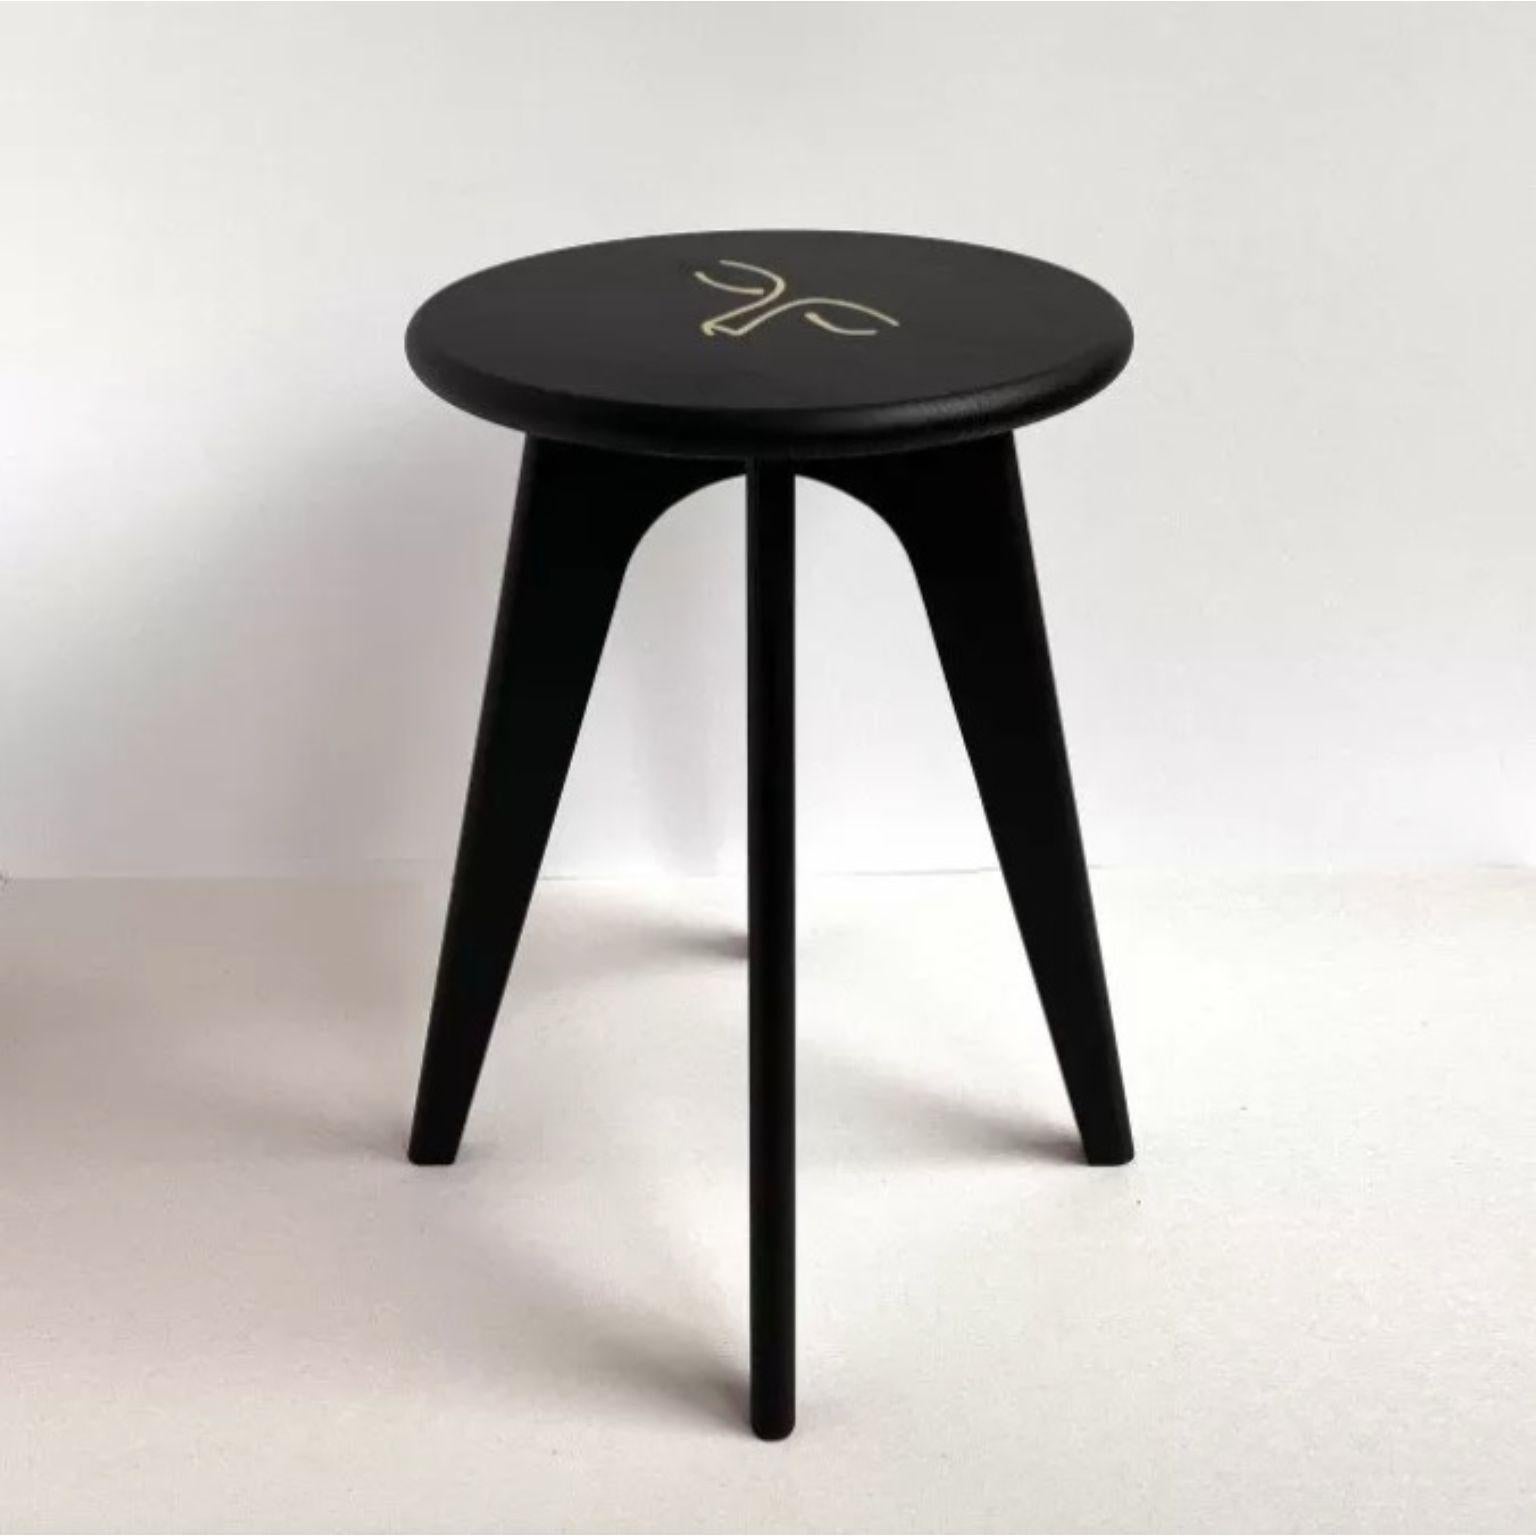 Face Design Black Stained Ash ASSY Stool by Mademoiselle Jo
Dimensions: Ø 35 x H 43 cm.
Materials: Ash wood and brass inlay.

Available in two wood colors and several designs.  Please contact us.

At the border between design and goldsmithing, the